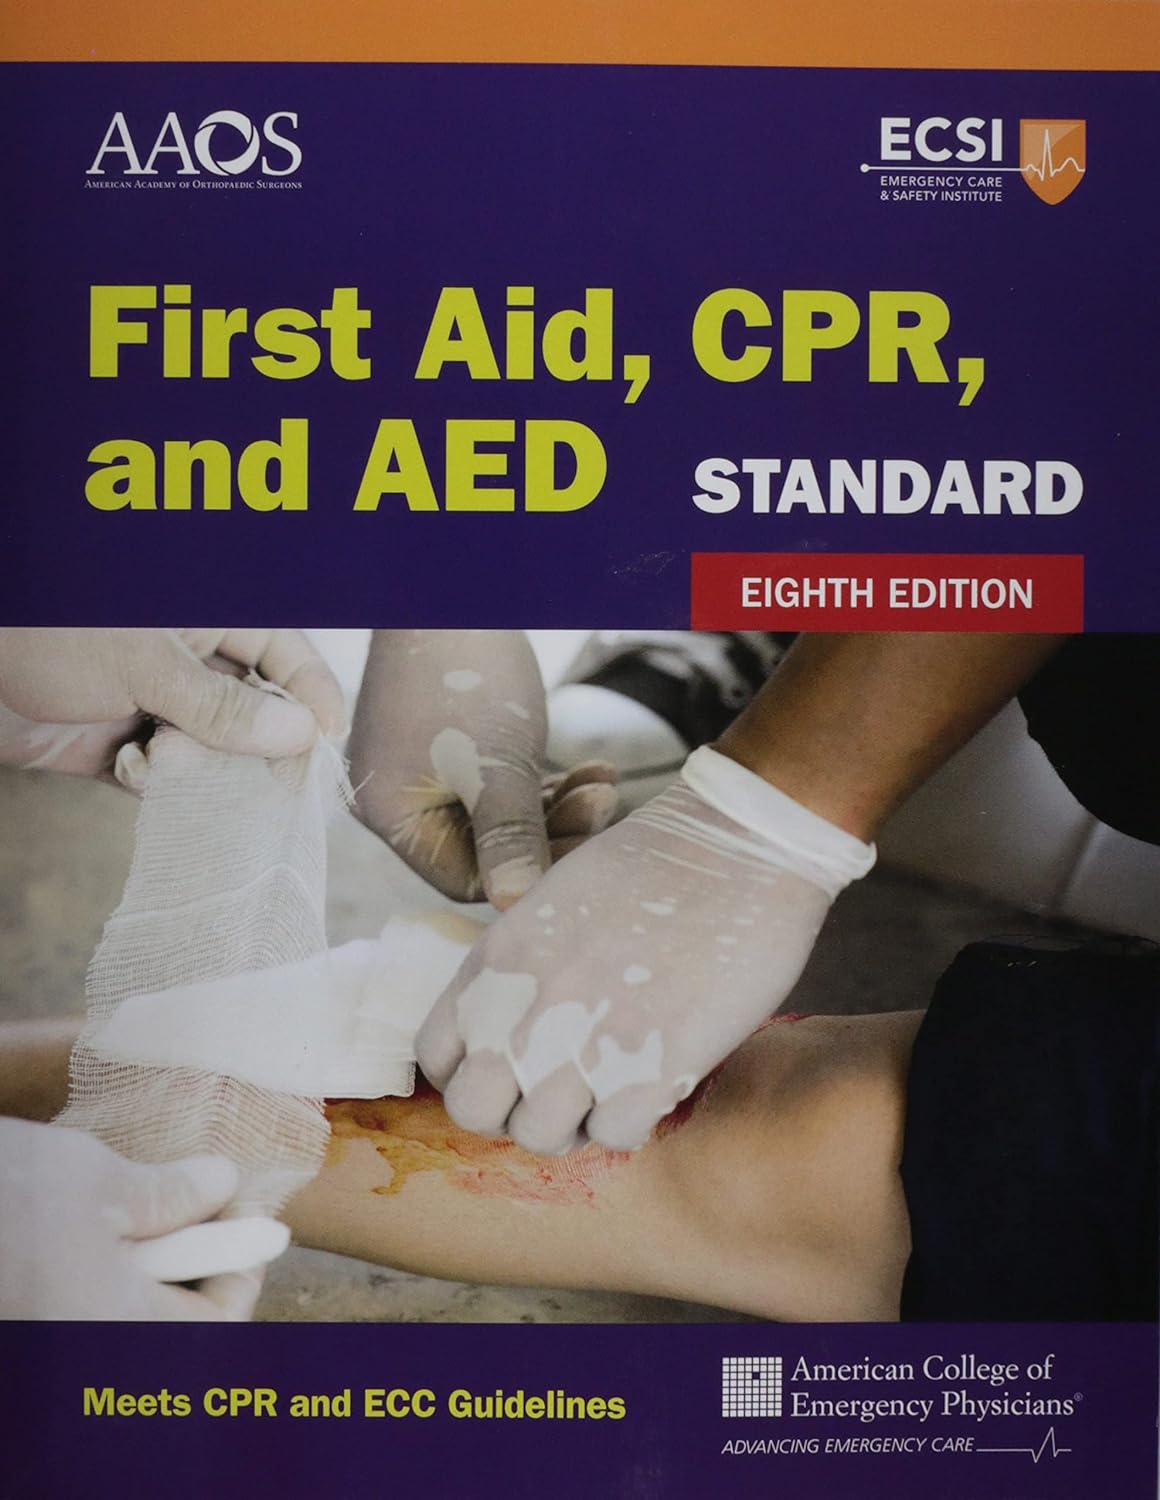 Standard First Aid, CPR, and AED, 8th Edition by  American Academy of Orthopaedic Surgeons